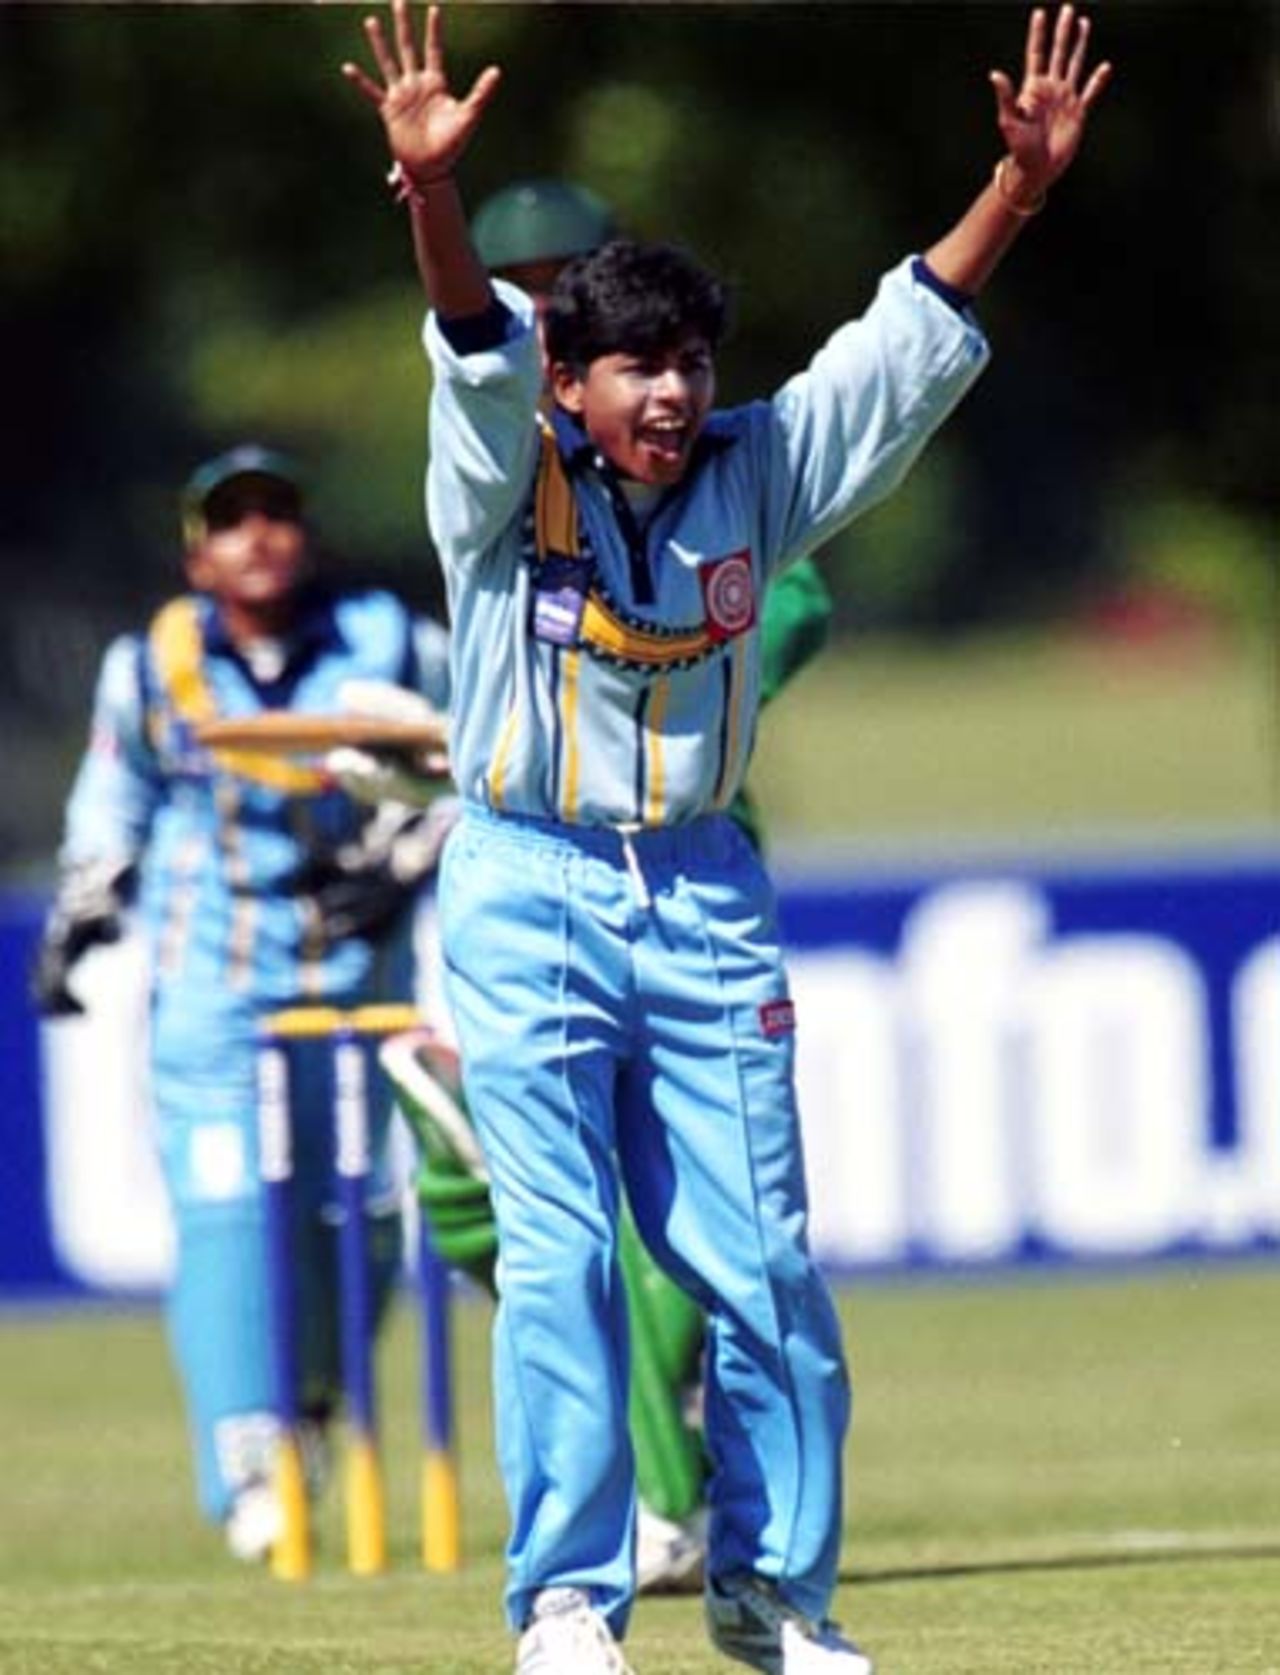 30 Nov 2000: India v South Africa - CricInfo Women's World Cup 2000 played at the Hagley Oval, Christchurch